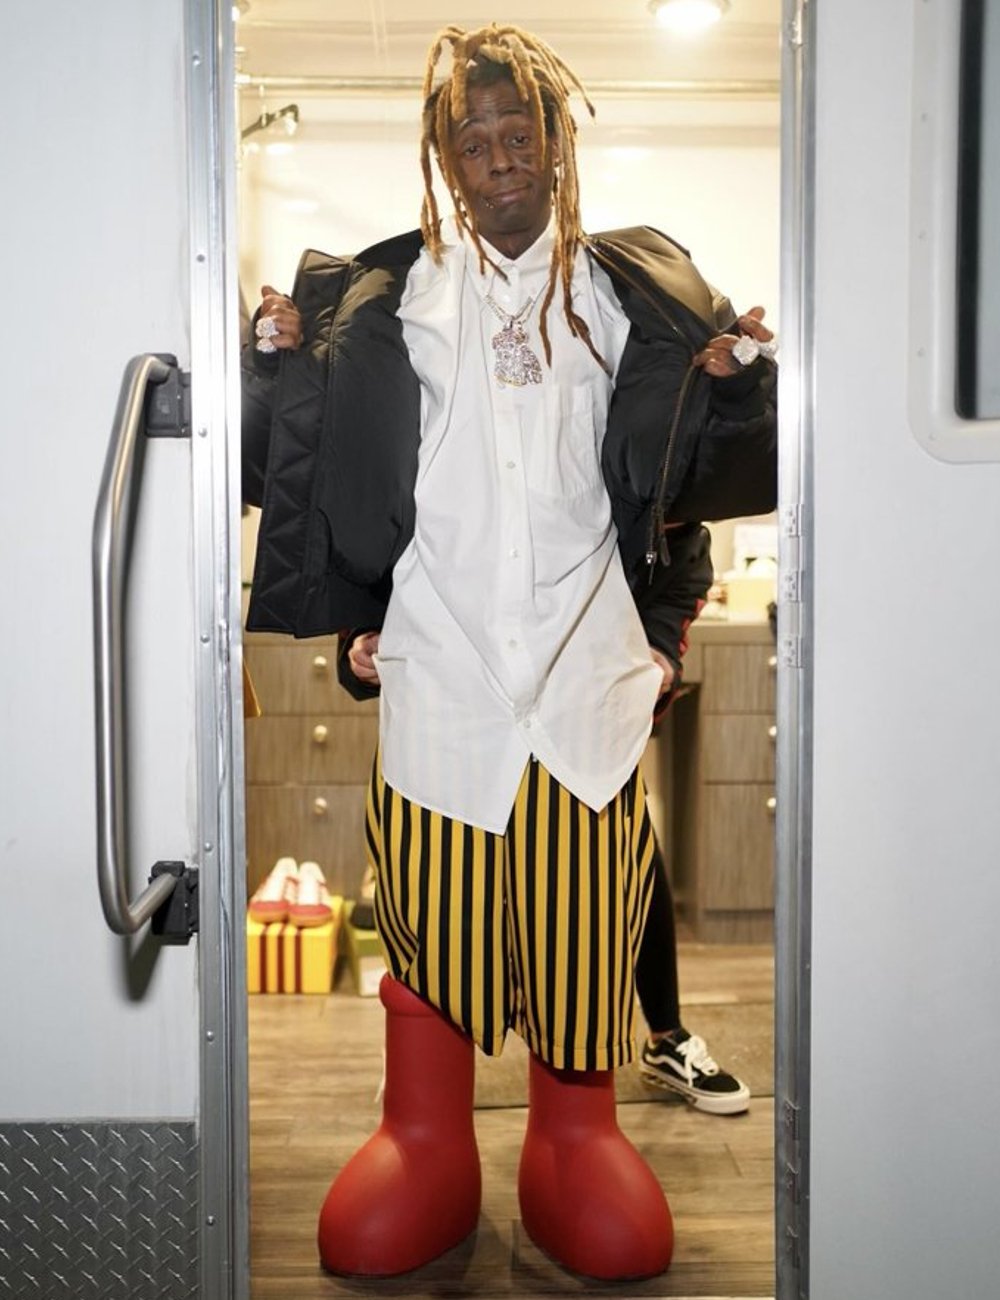 Lil Wayne - big red boots - Big red boots - inverno - street style - https://stealthelook.com.br